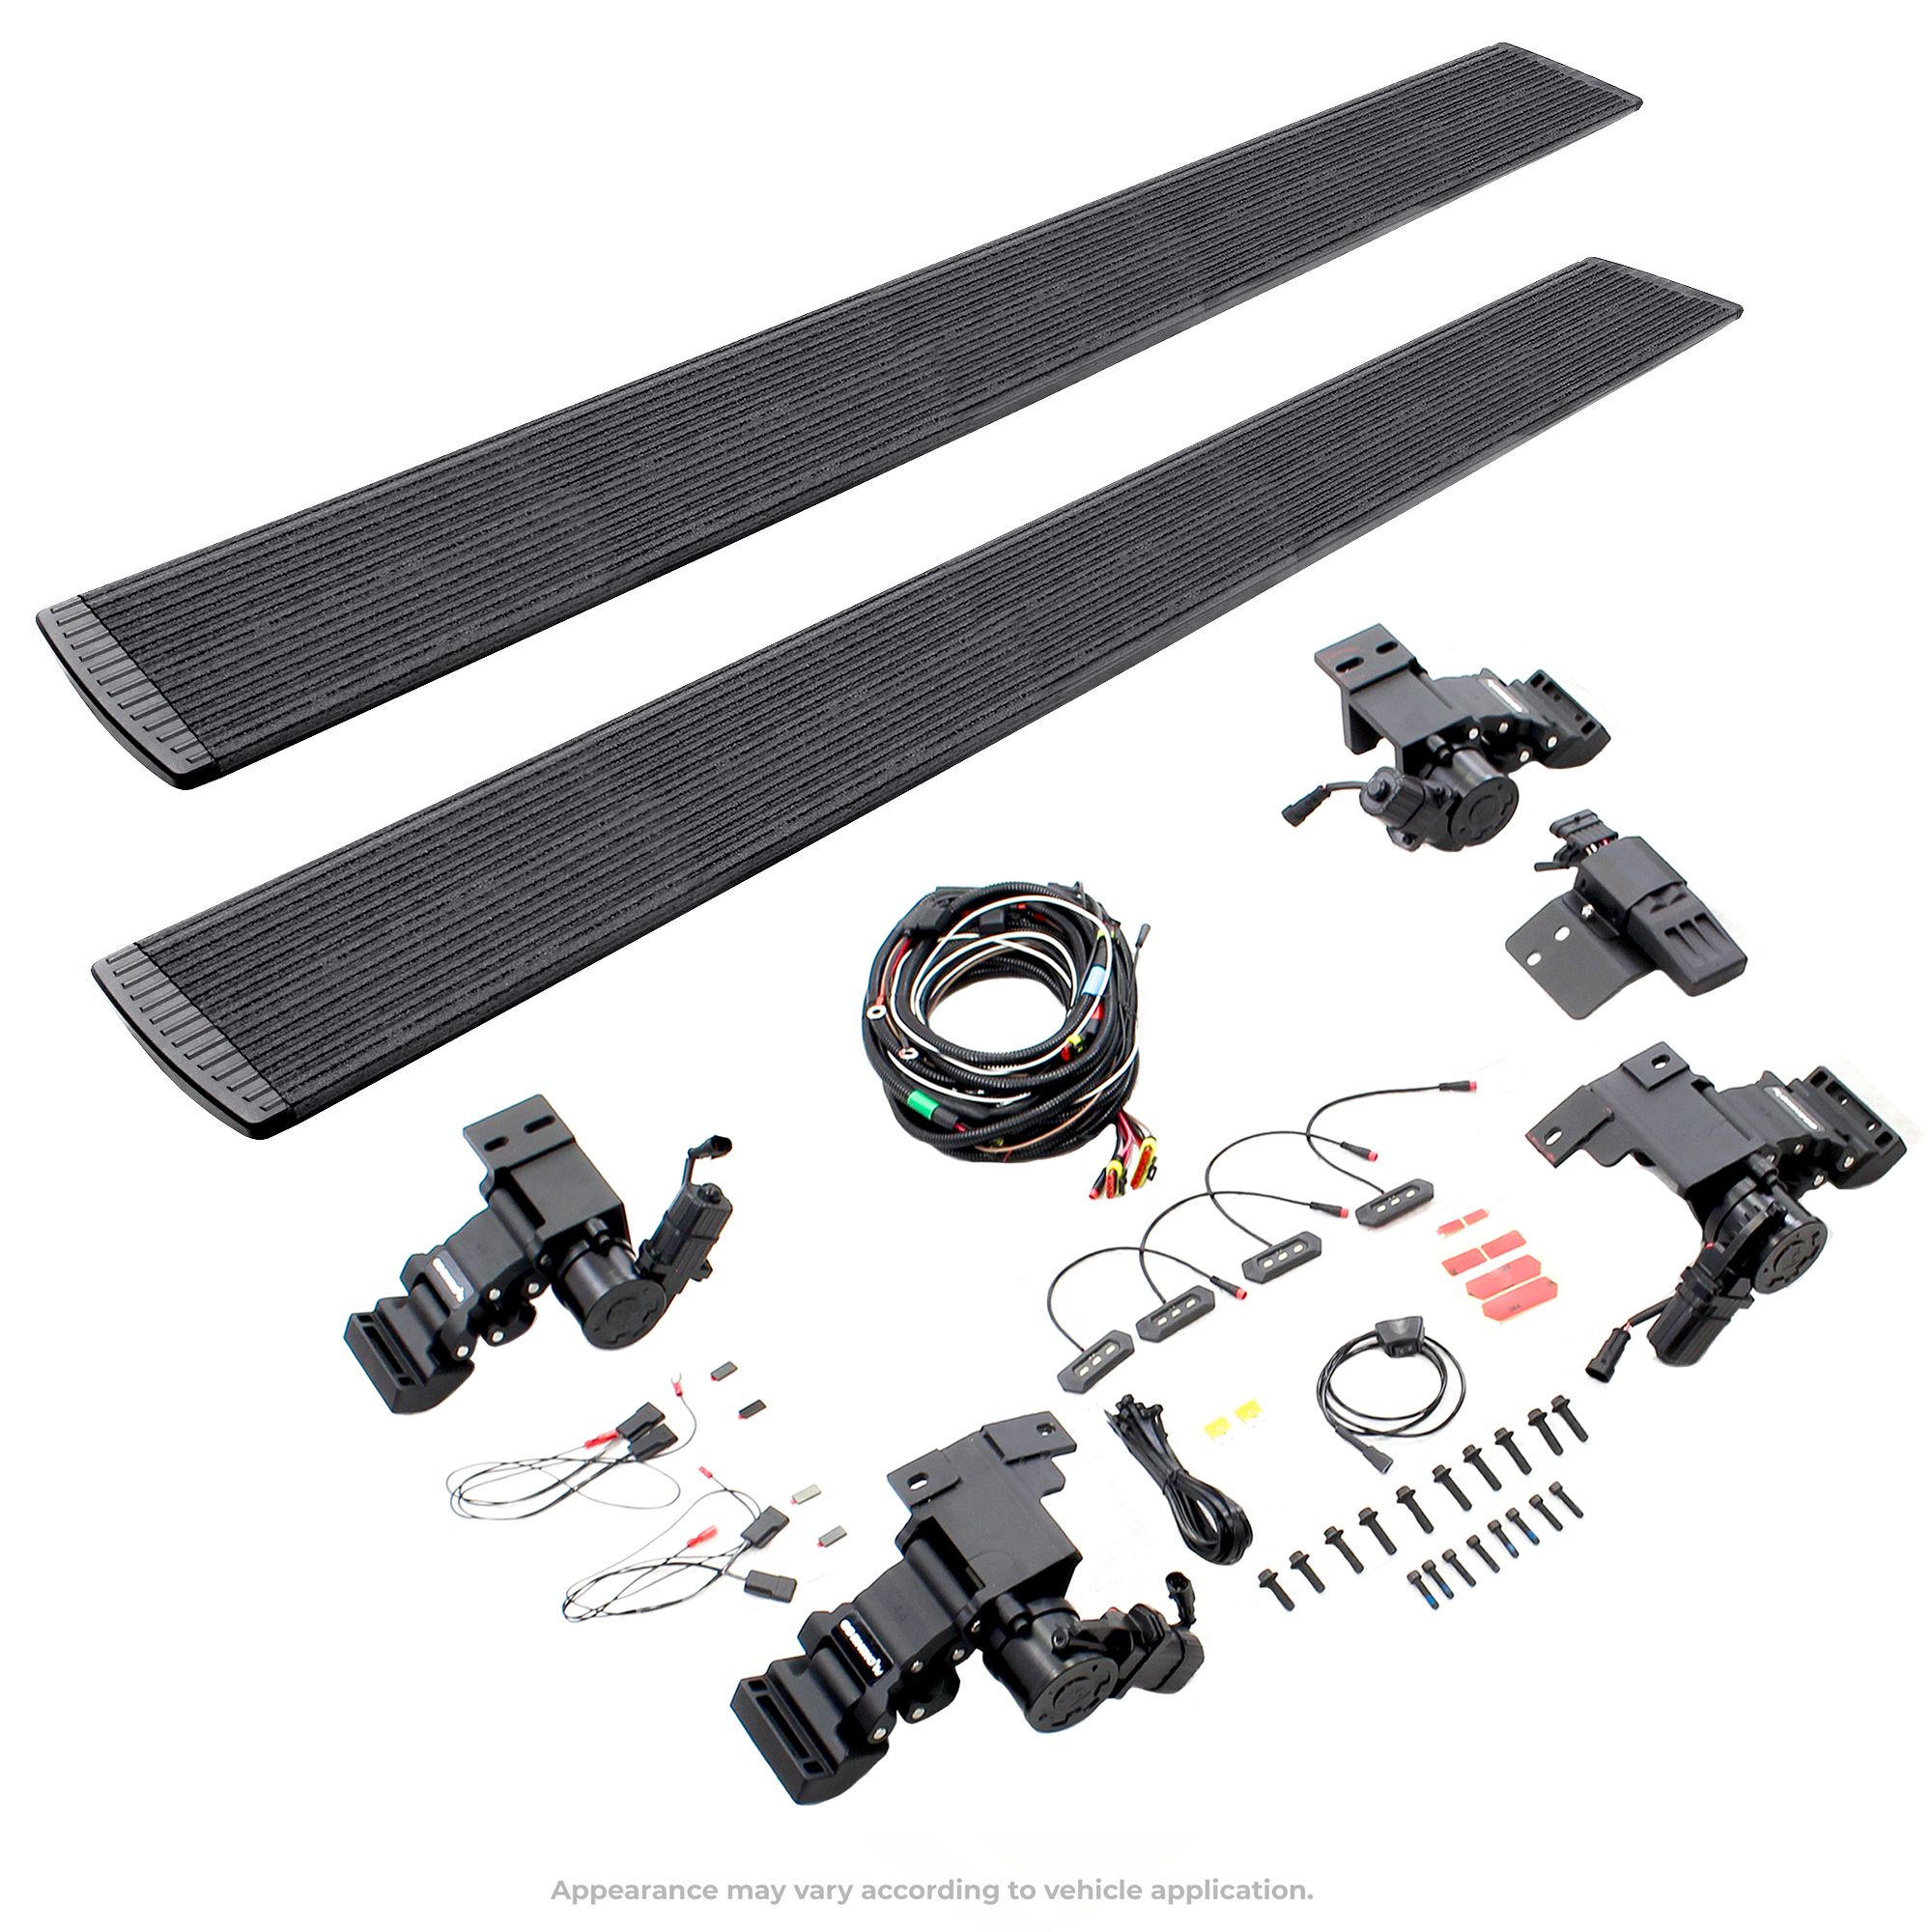 Go Rhino 20415587T - E1 Electric Running Boards With Mounting Brackets - Protective Bedliner Coating